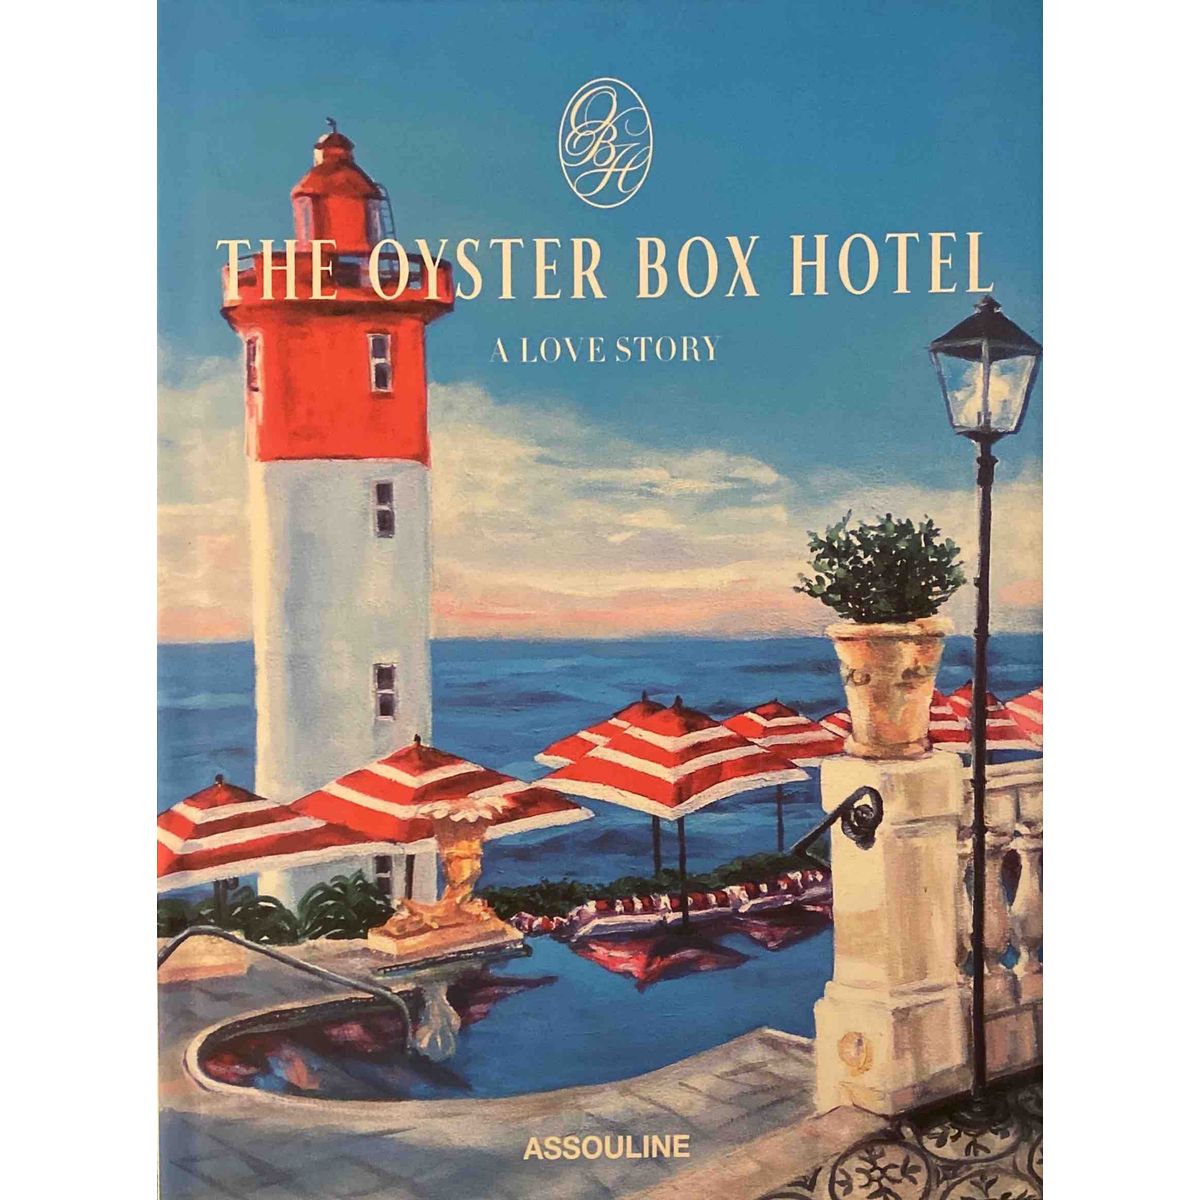 ISBN: 9781614287360 / 1614287368 - The Oyster Box Hotel: A Love Story by Jane Broughton [2019]